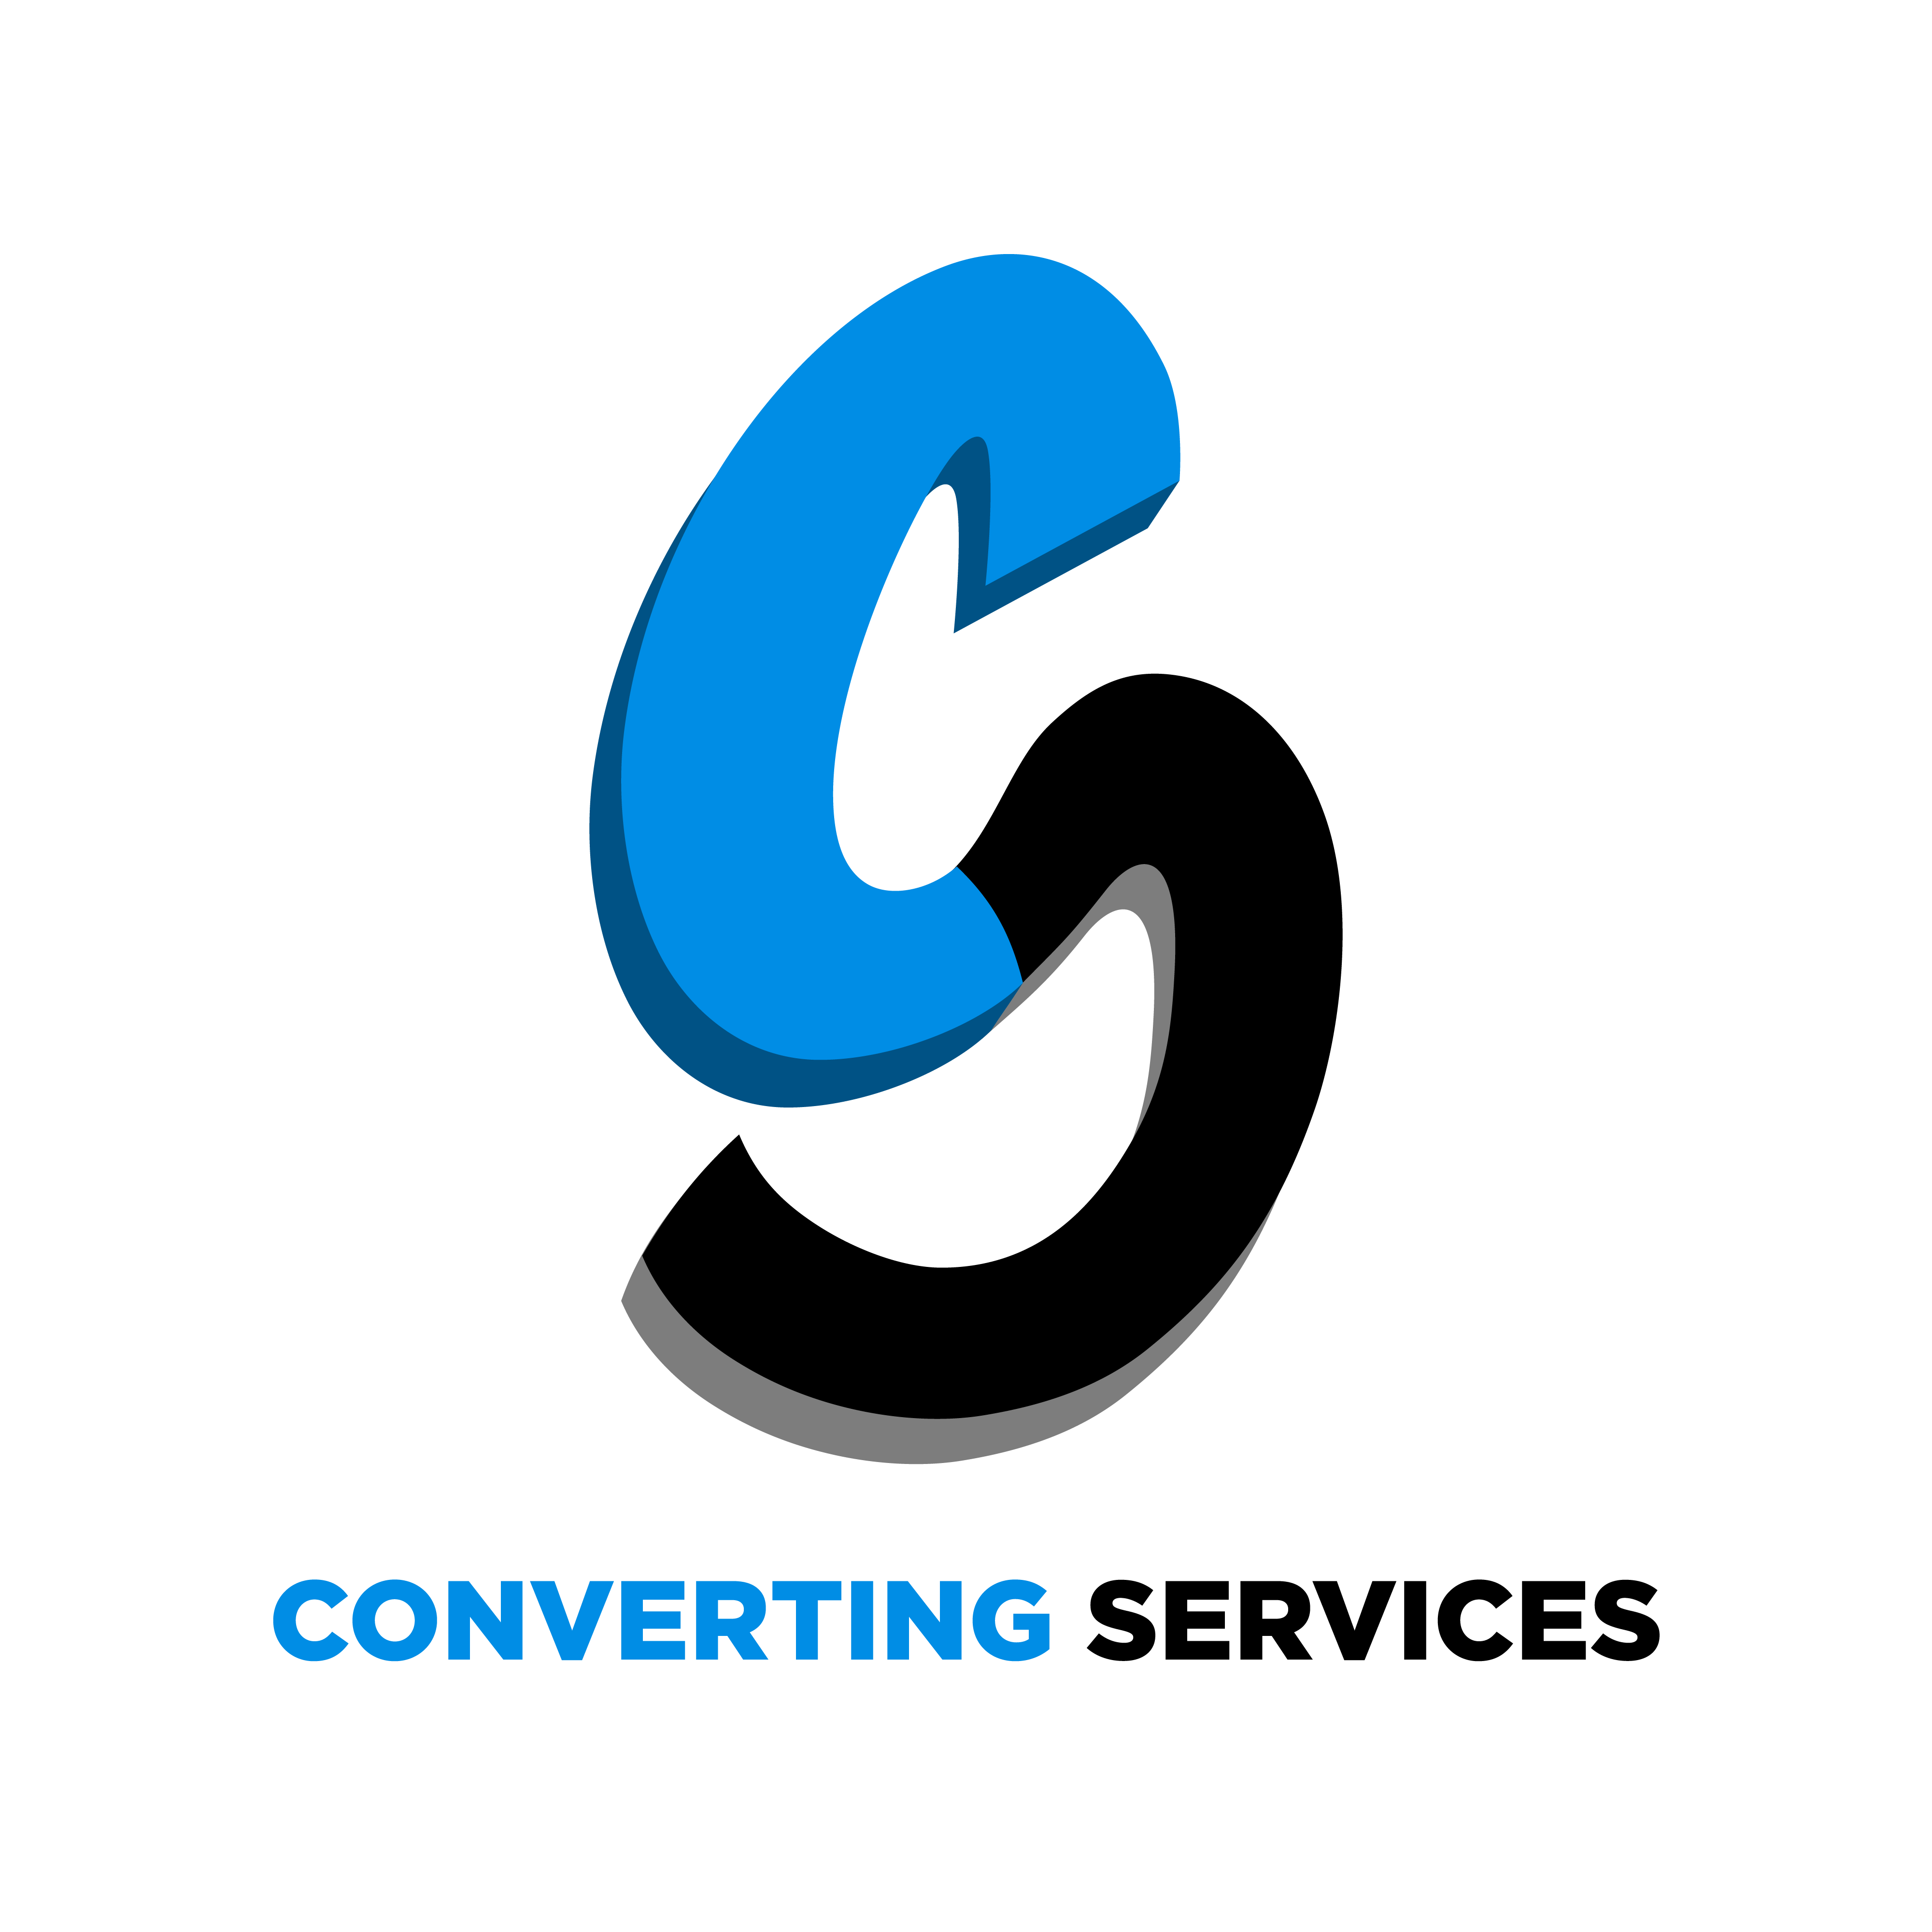 CONVERTING SERVICES